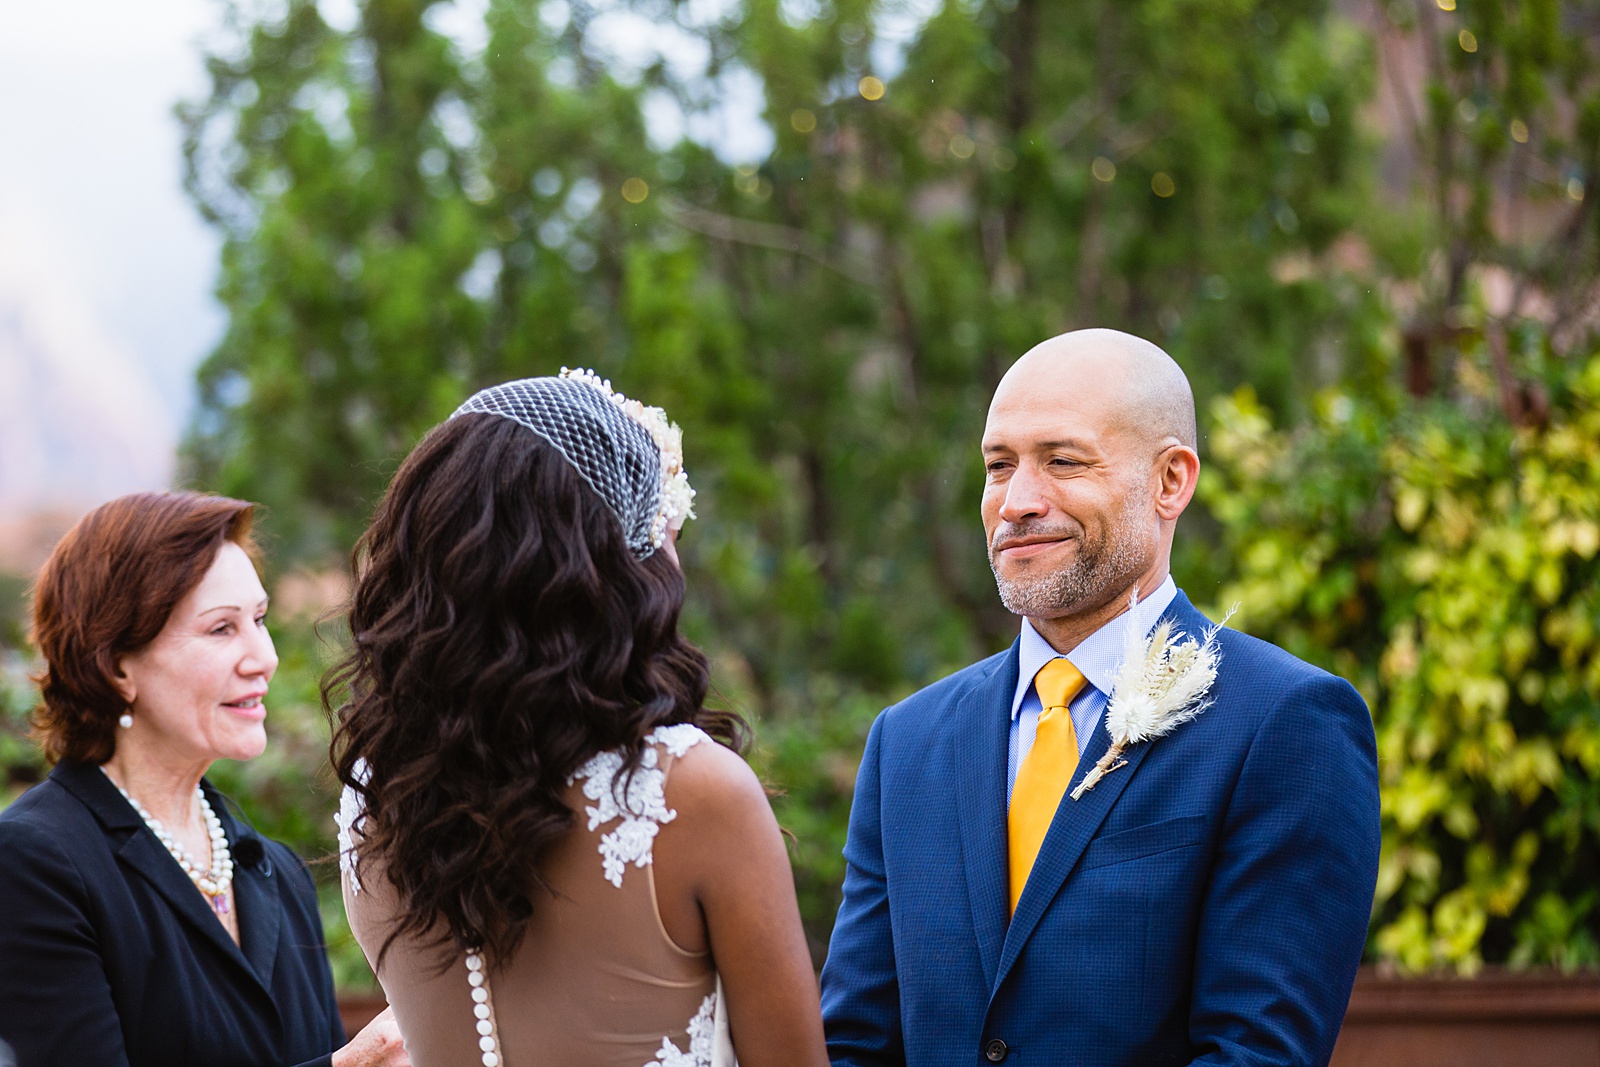 Groom looking at his bride during their wedding ceremony at Agave of Sedona by Sedona wedding photographer PMA Photography.